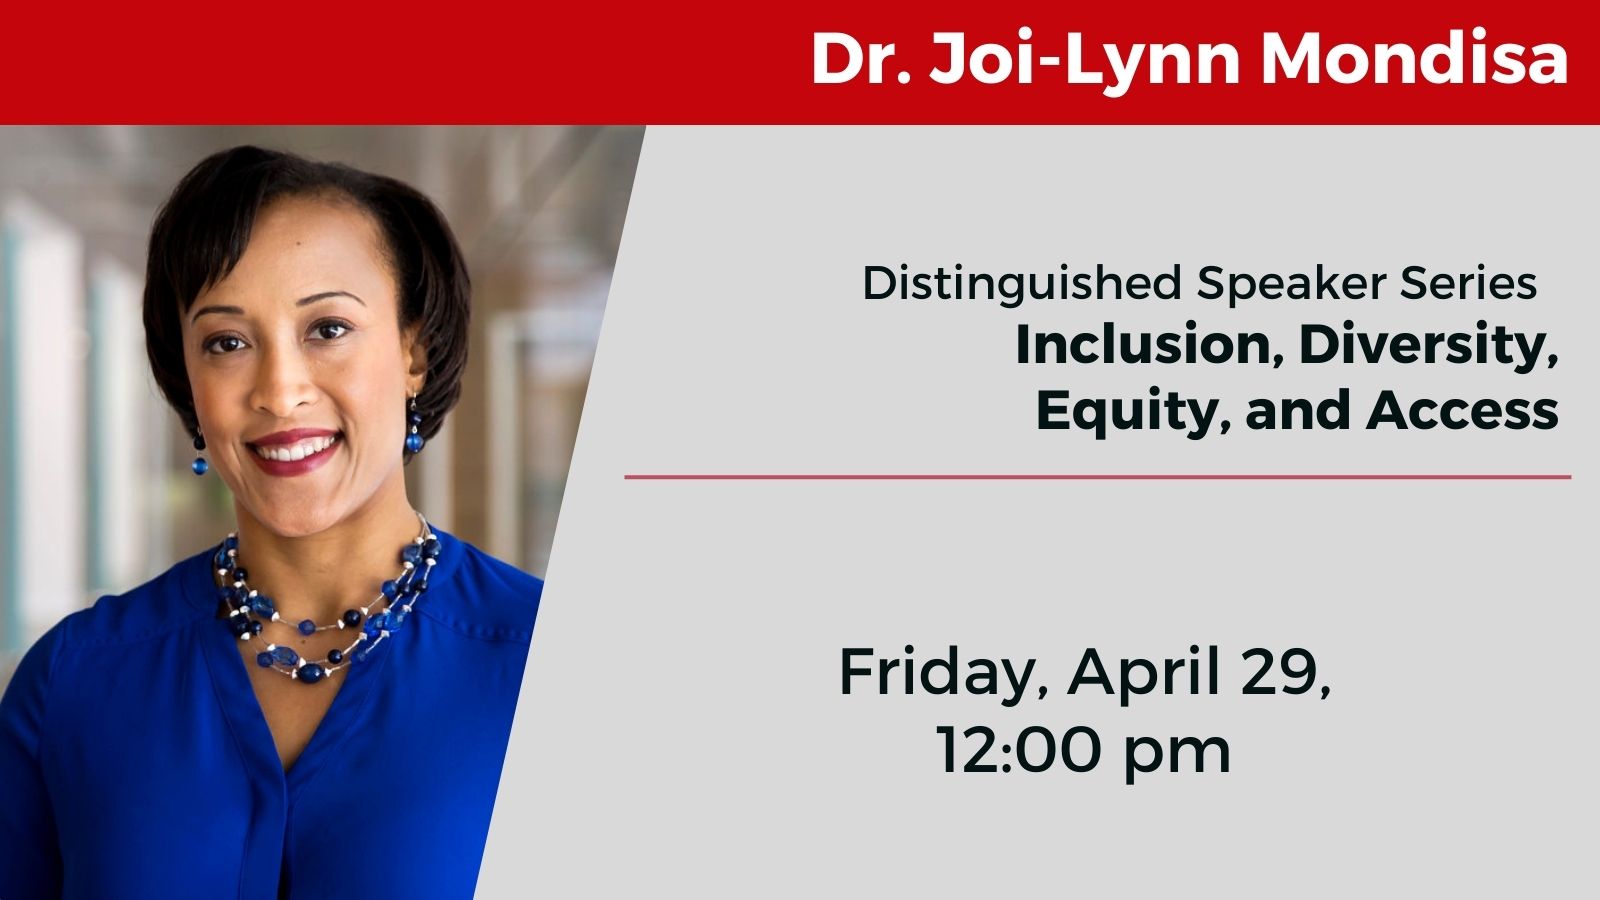 Photo of Dr. Joi-Lynn Mondisa. Distinguished speaker for our Inclusion, Diversity, Equity, and Access series. Friday April 29 12:00 pm